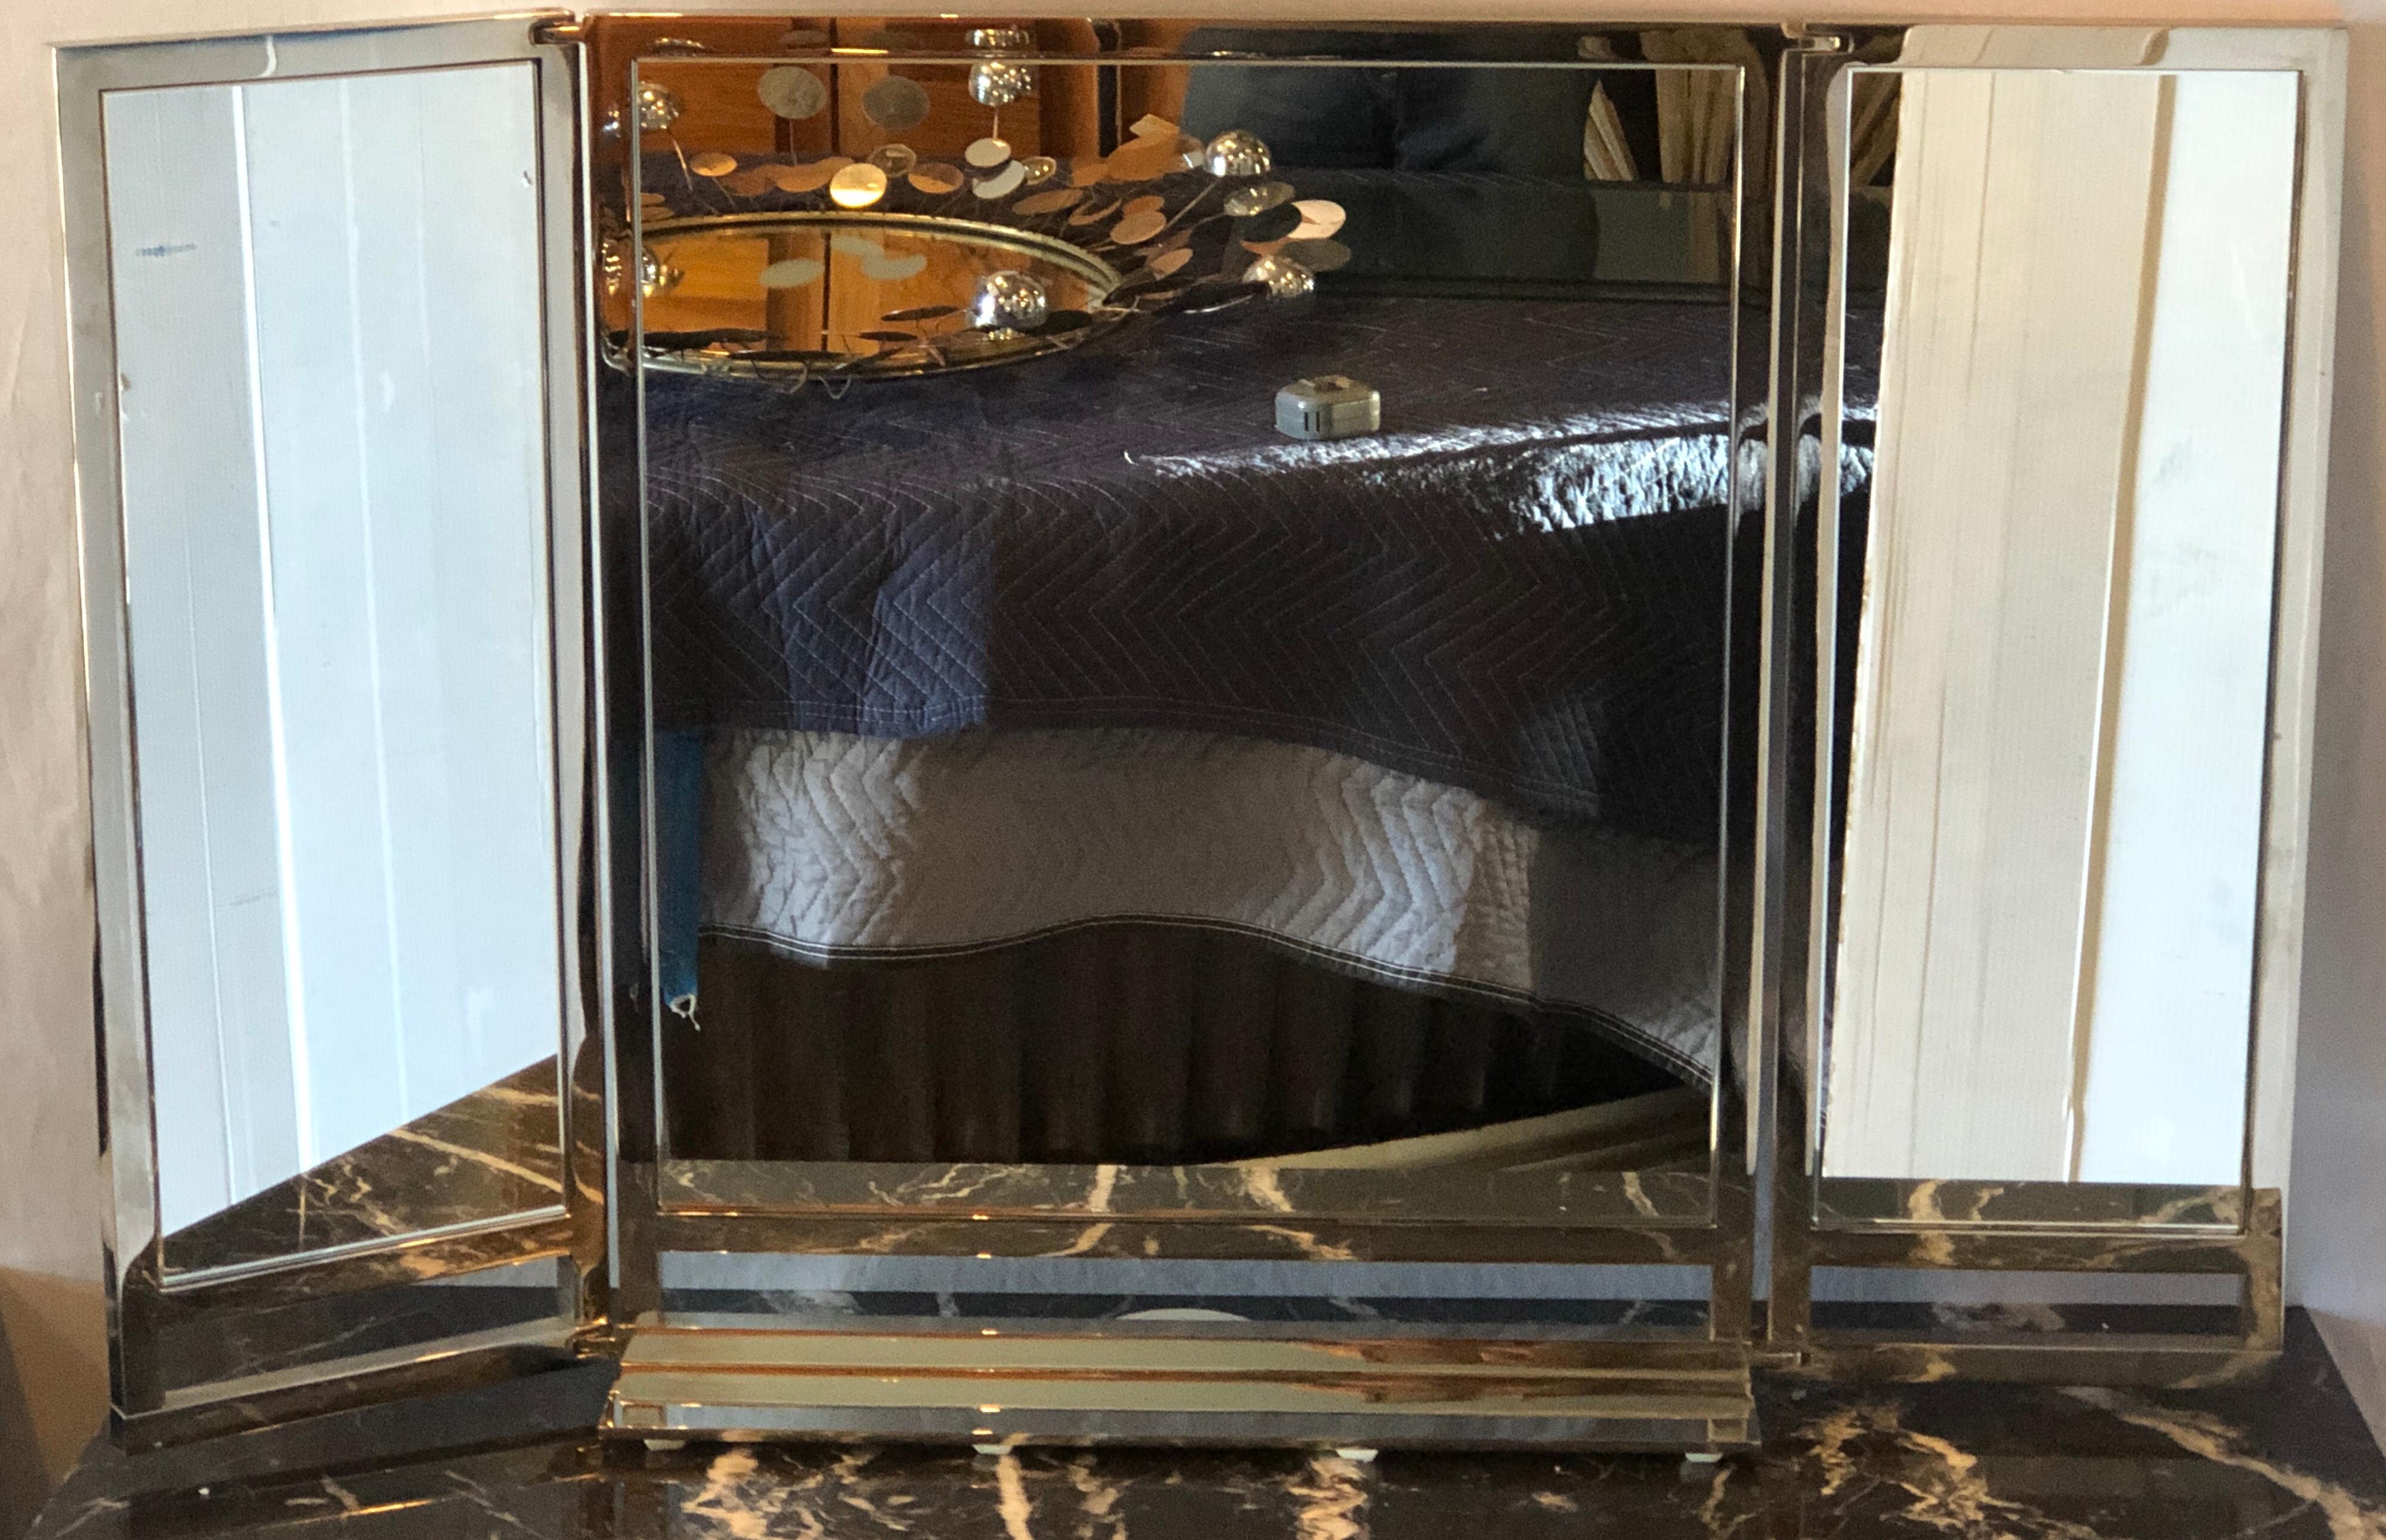 A Hollywood Regency style solid heavy chrome-plated tri-fold vanity or table mirror. The sleek and stylish design stands out as this is certain a designer or decorator piece. The floating base supporting three mirror panels all framed in chrome. Too